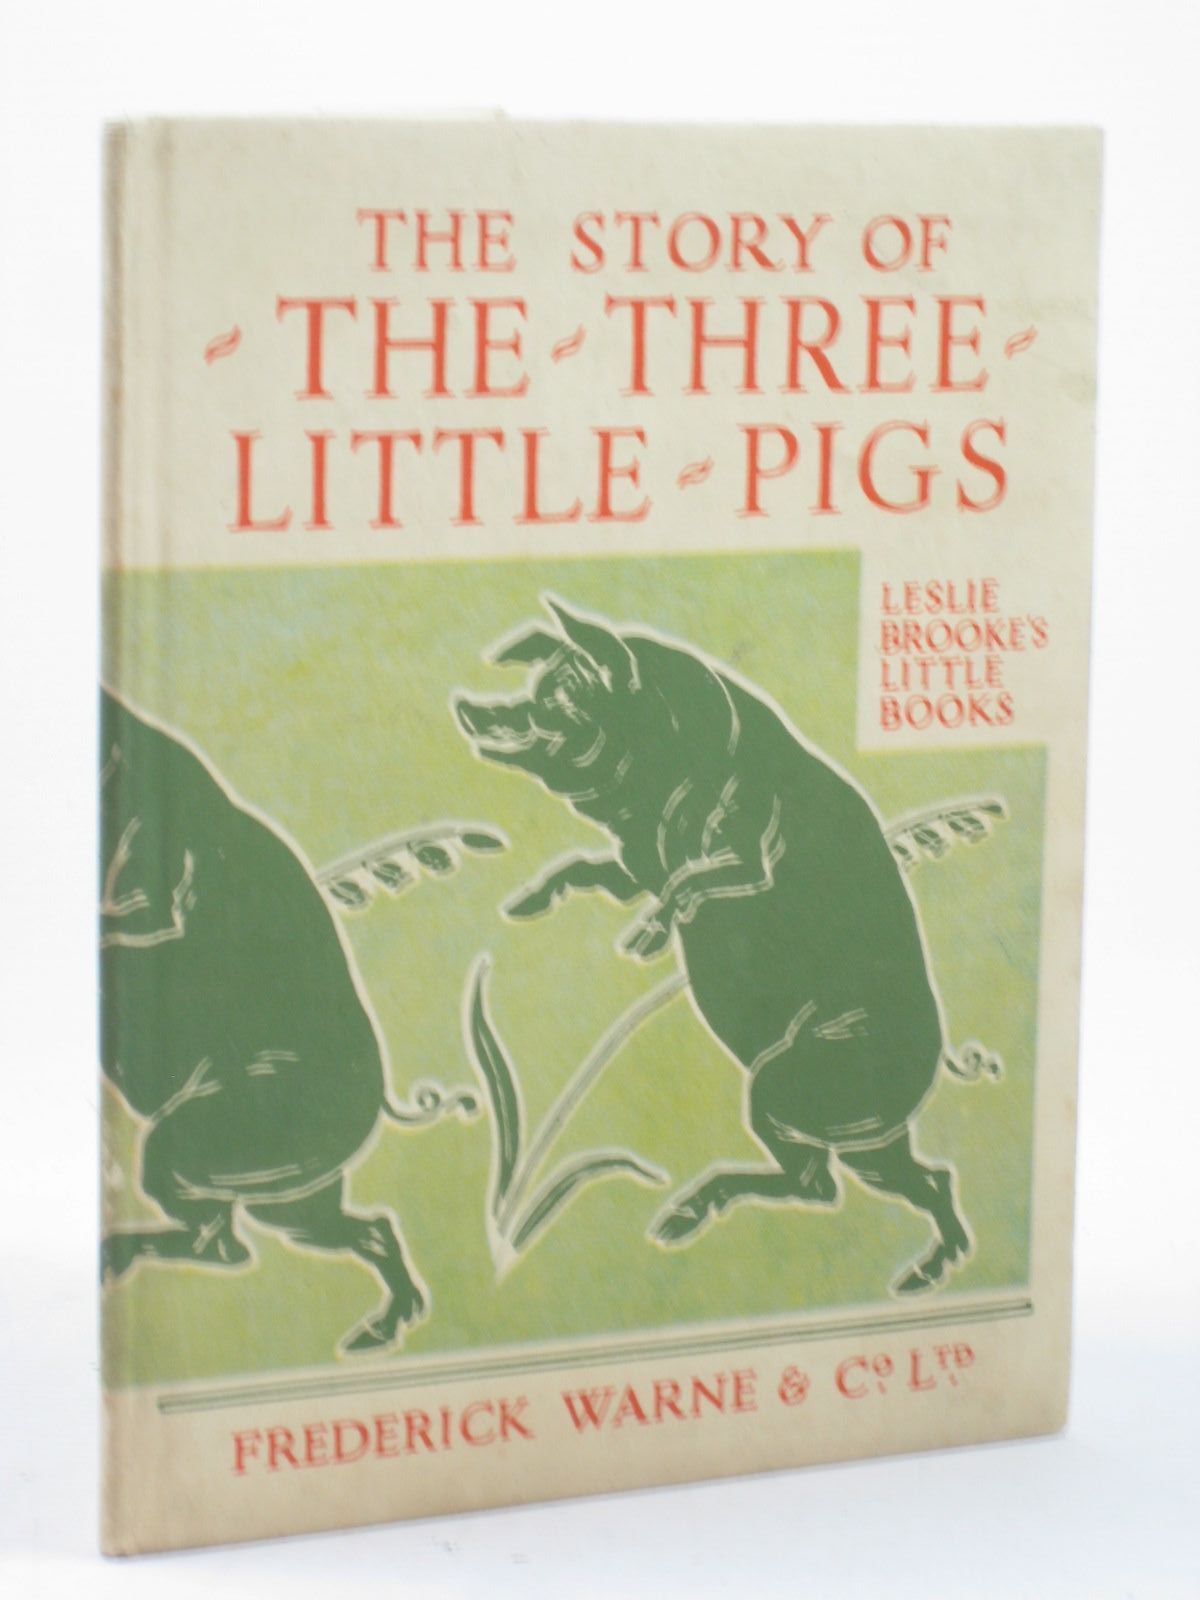 Three Little Pigs Story Book Free Download